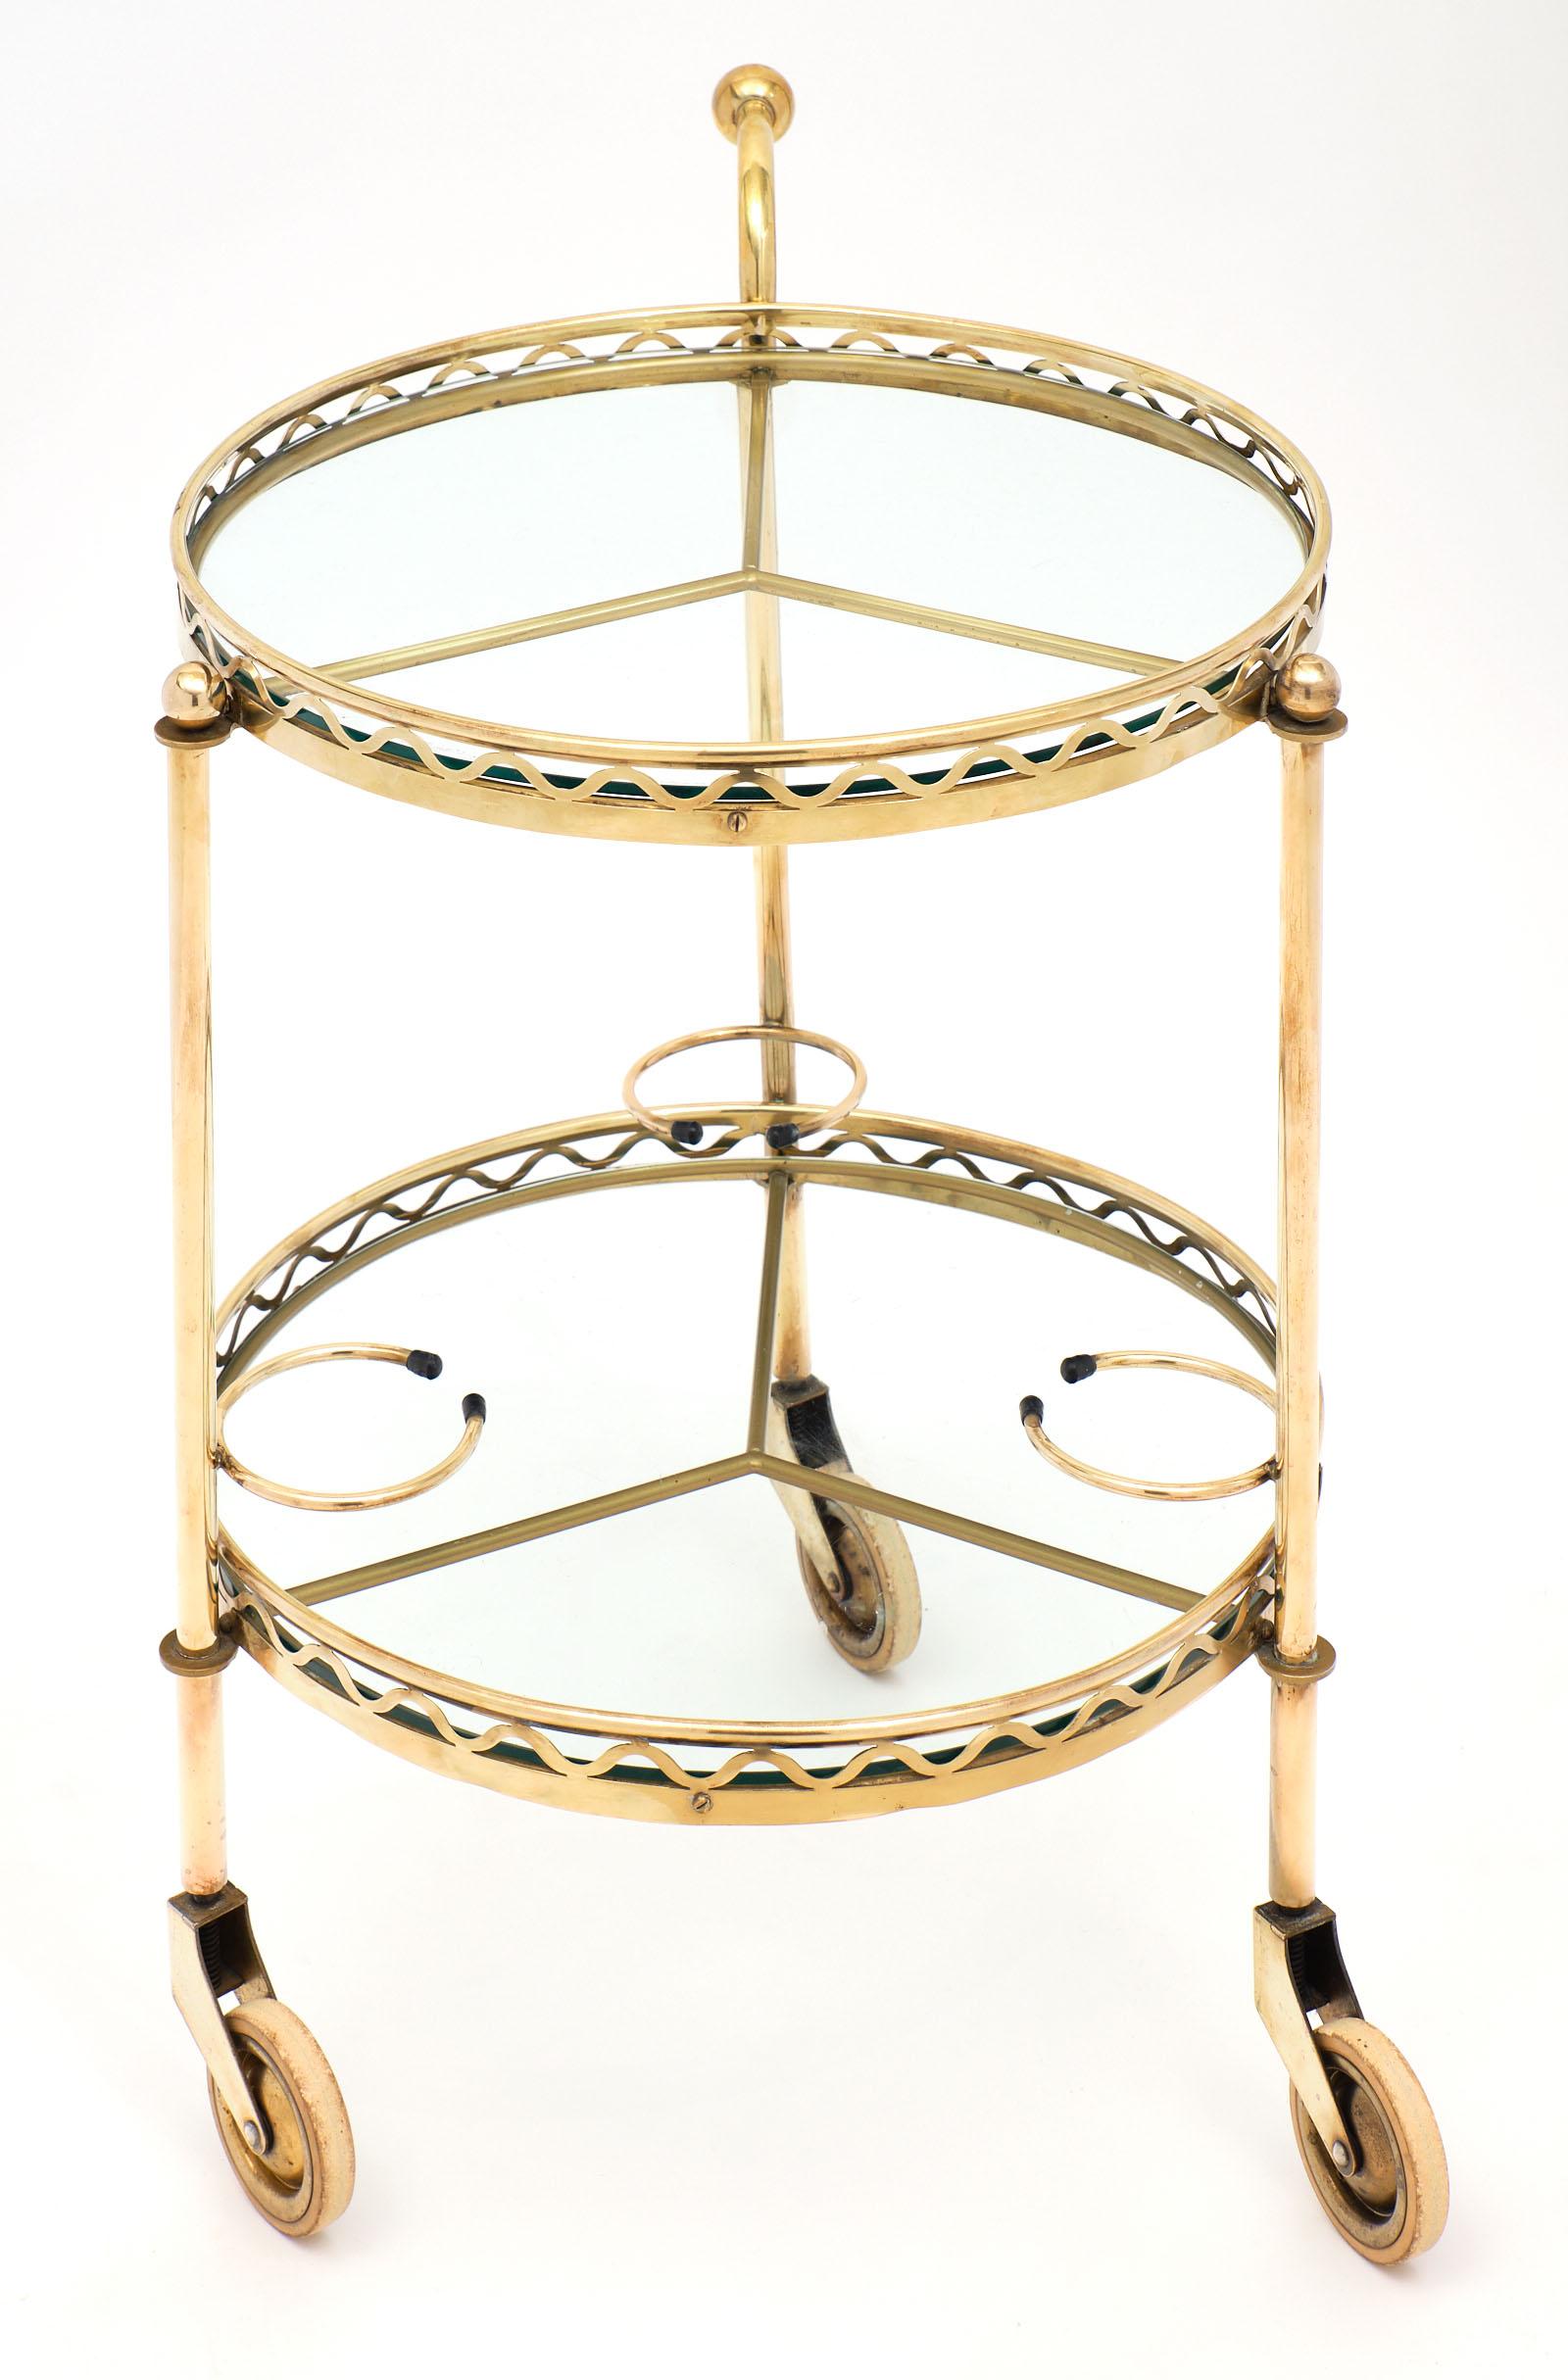 Vintage French brass bar cart with a fun, practical shape and gilt brass structure. The tripod casters are in excellent vintage condition and support two levels of clear glass. We love the bottle holders and the wave like decor on the trim.